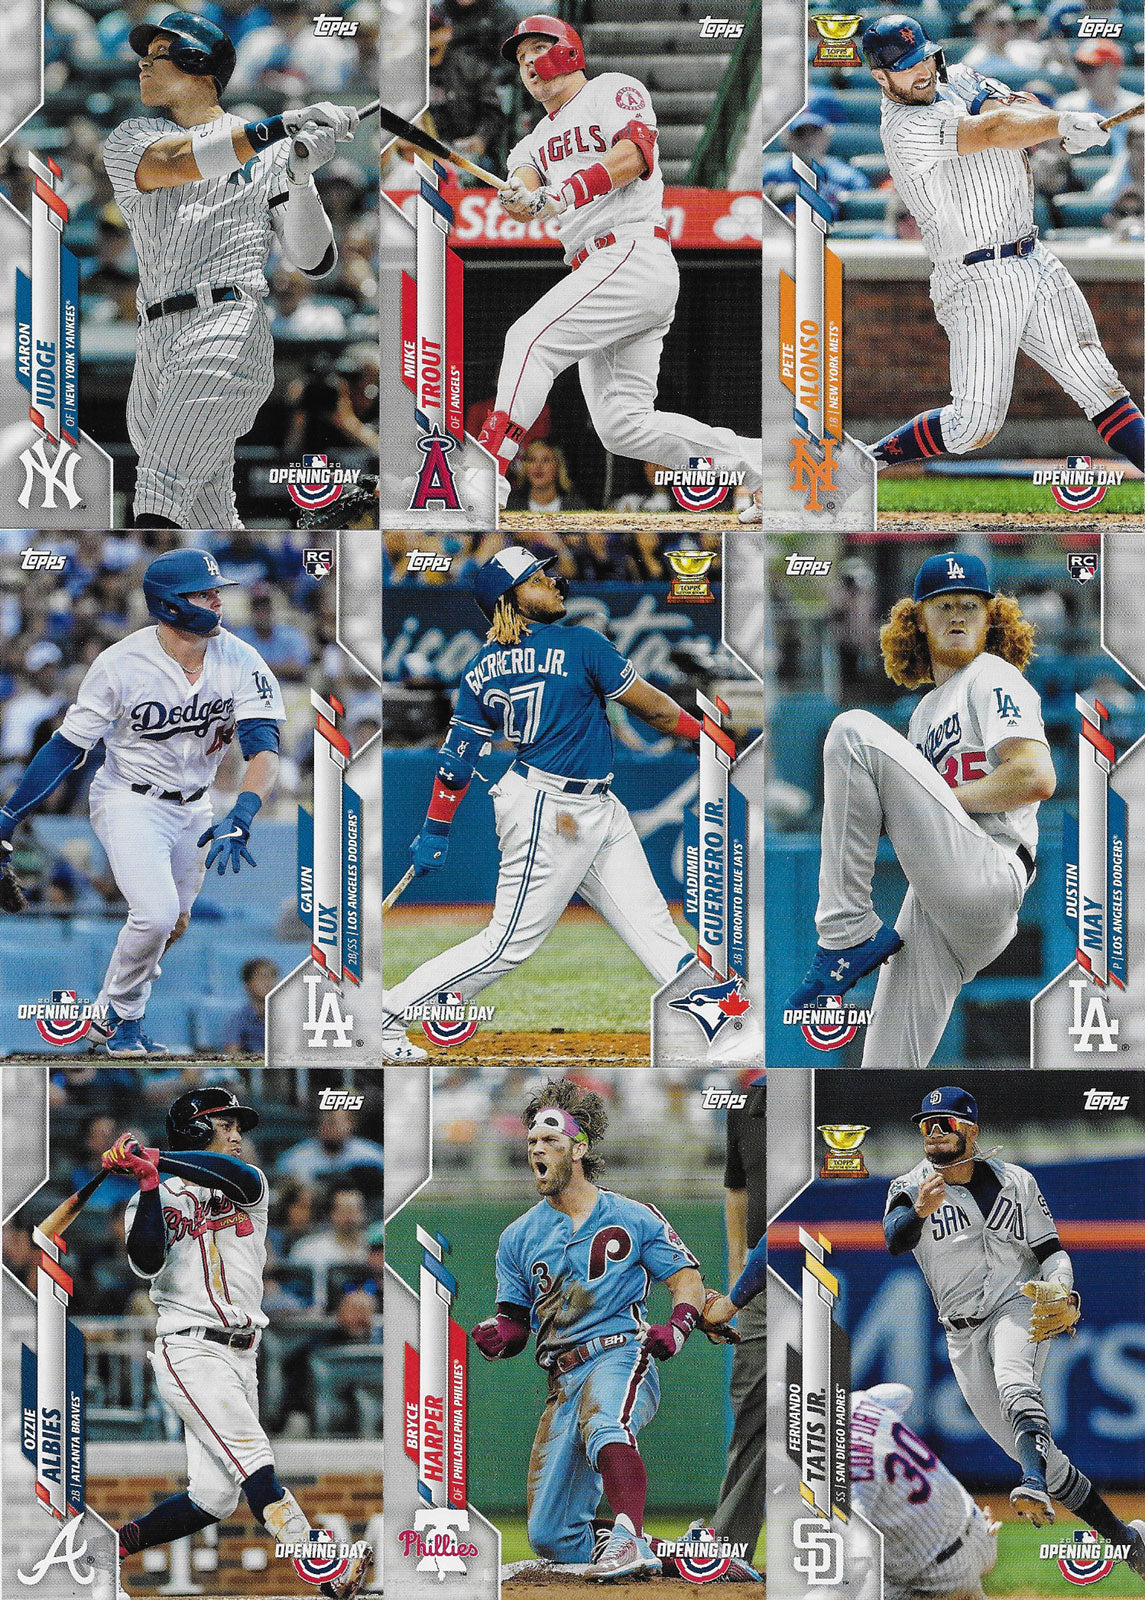 2016 Topps Opening Day Baseball offers Mascot card inserts